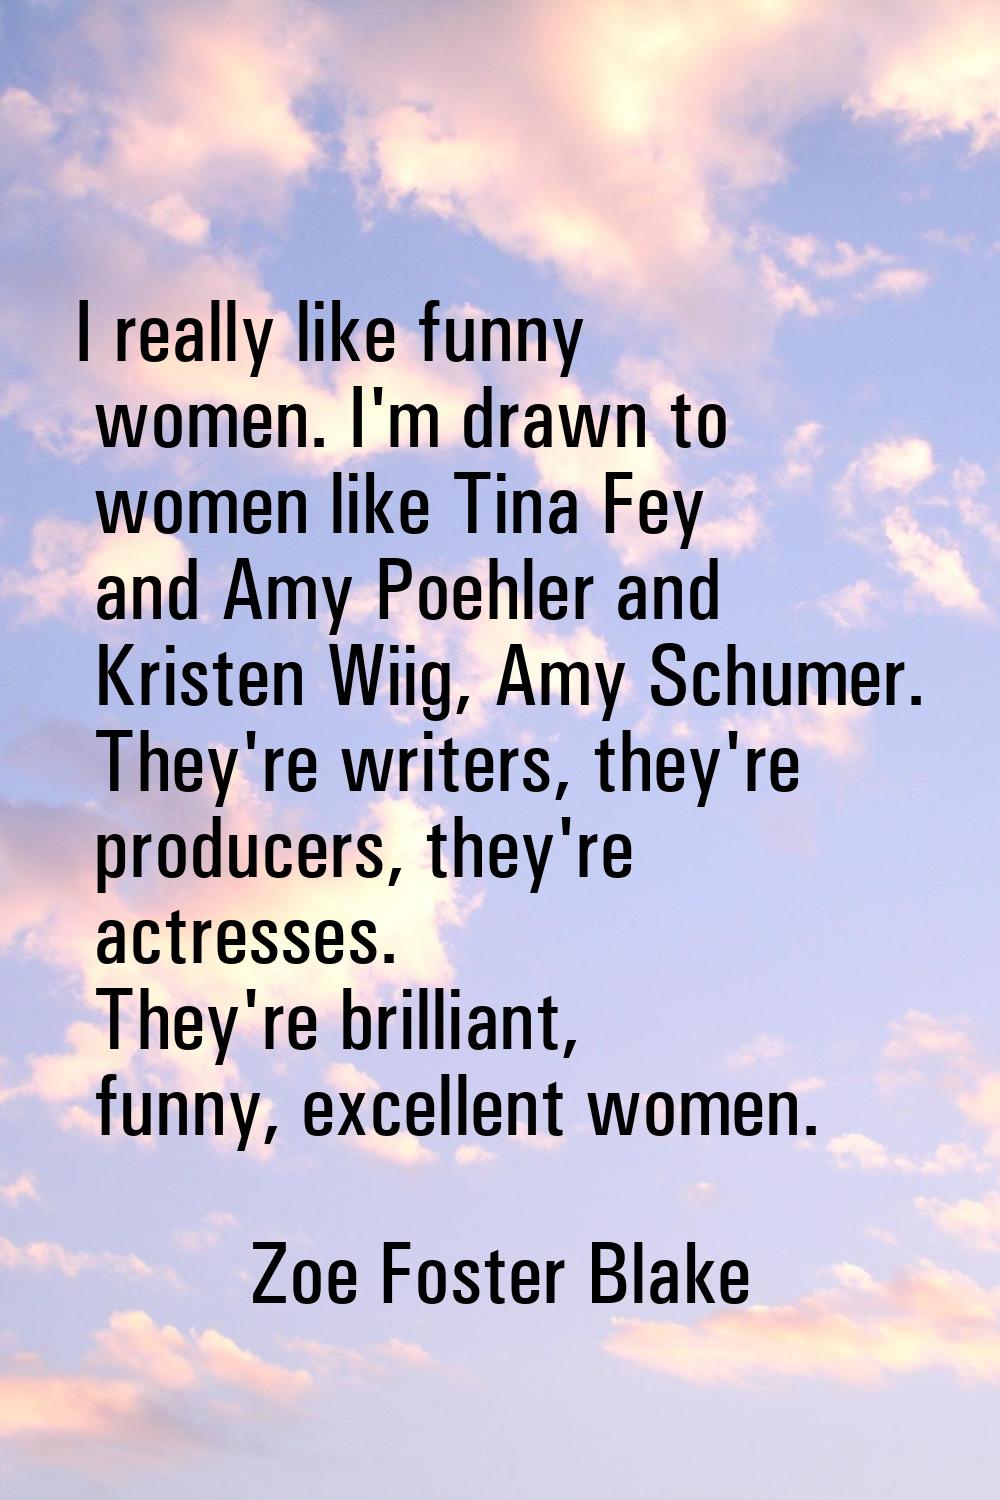 I really like funny women. I'm drawn to women like Tina Fey and Amy Poehler and Kristen Wiig, Amy S